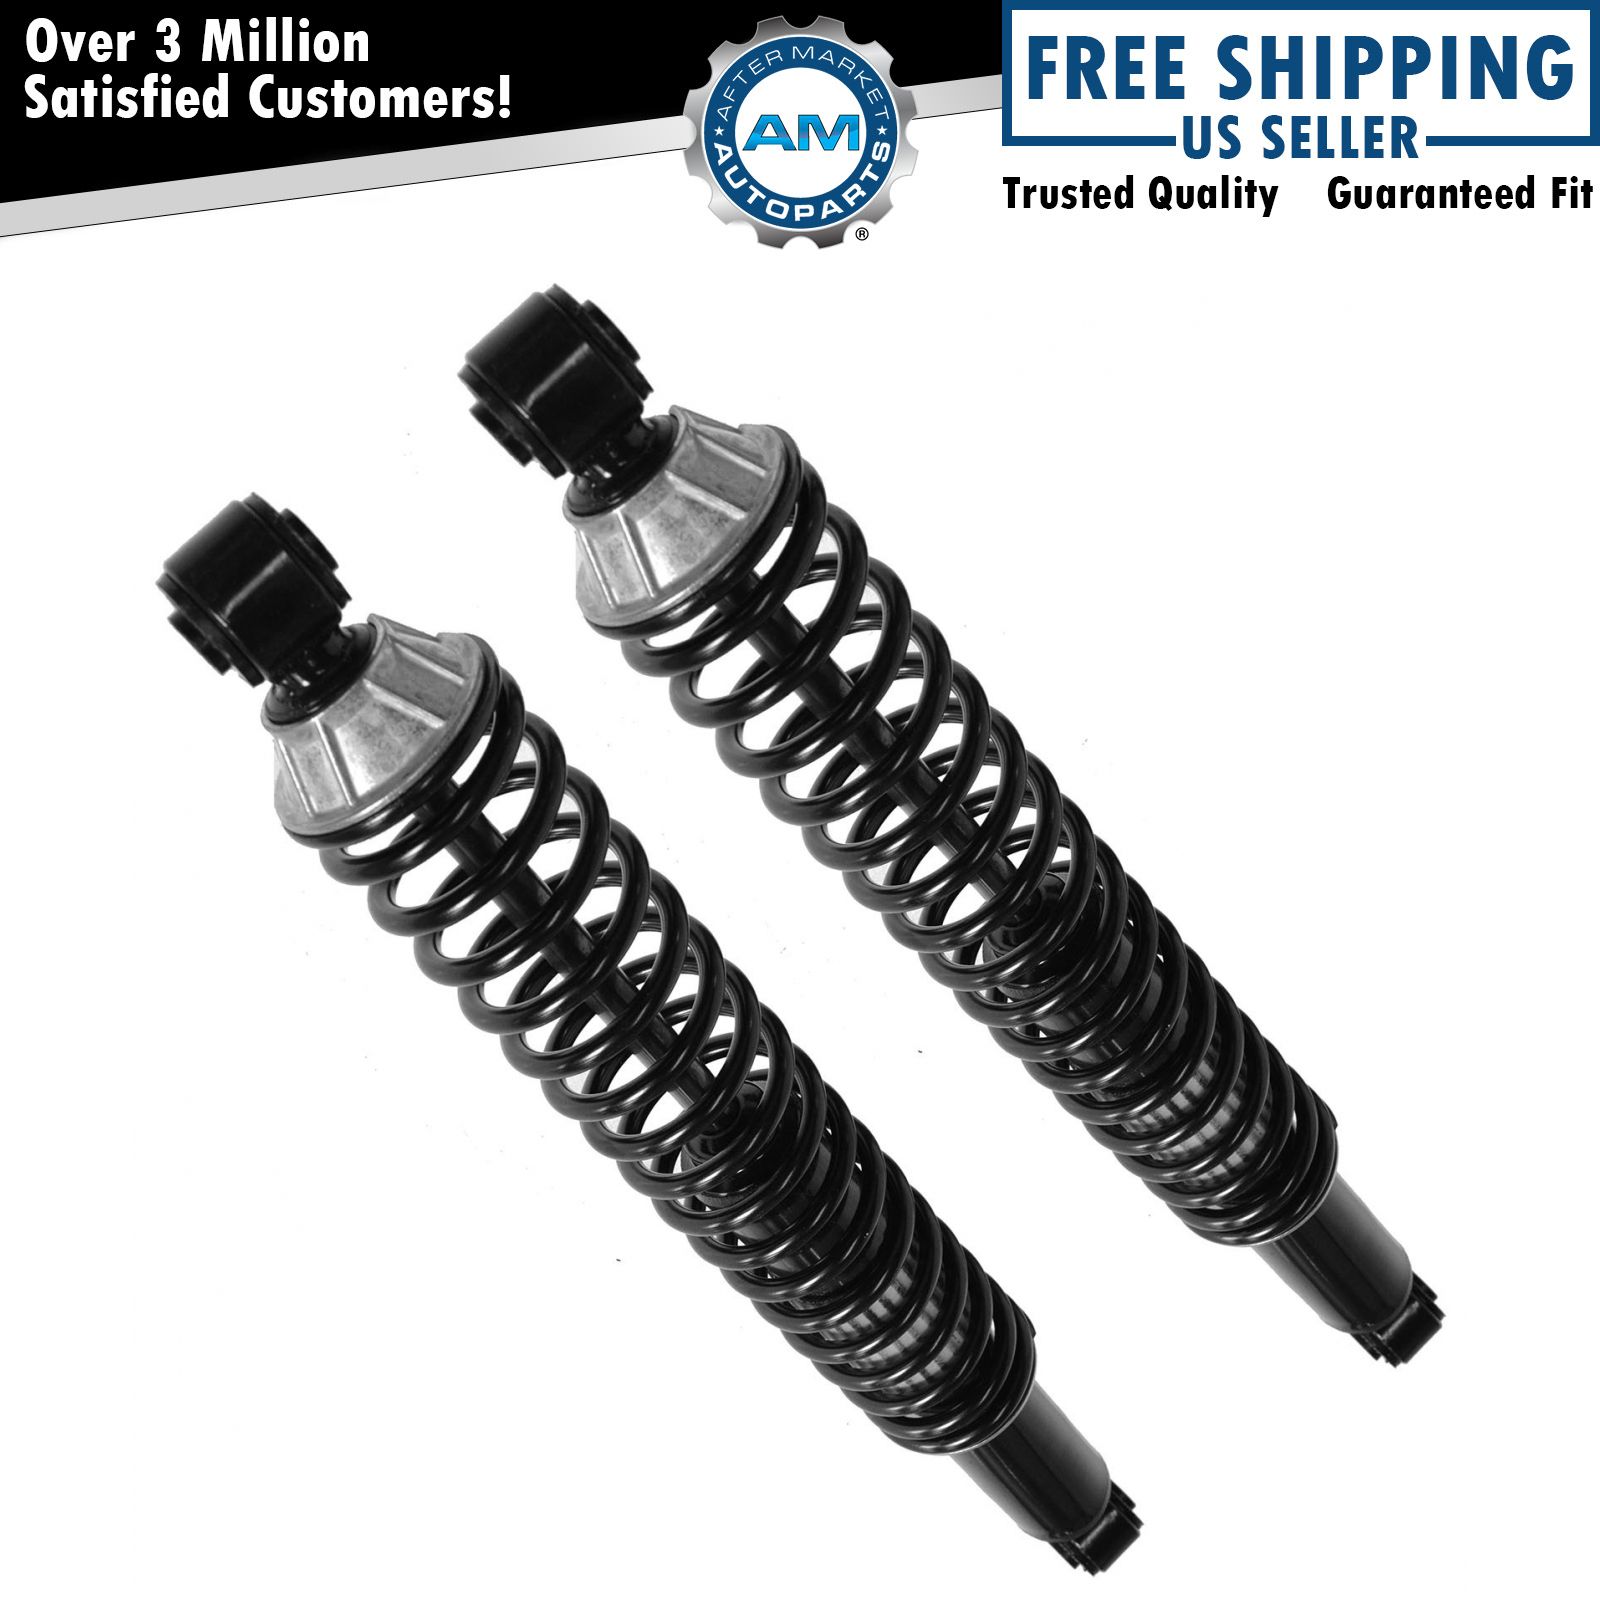 MONROE Shock Absorbers Load Adjusting Rear Pair Set for Chevy GMC Cadillac